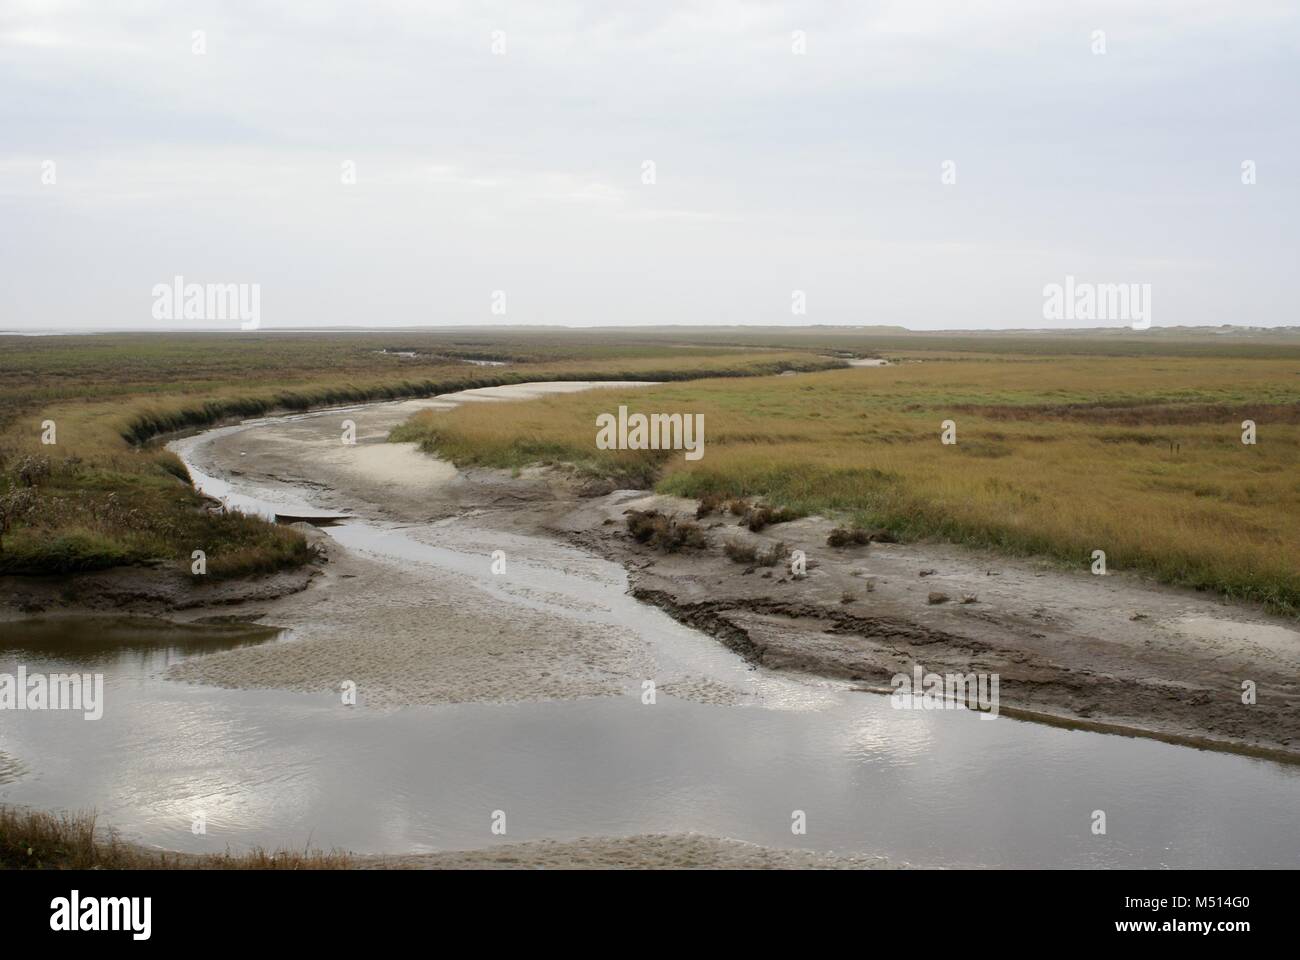 wadden sea and salt marshes in nordfriesland germany Stock Photo